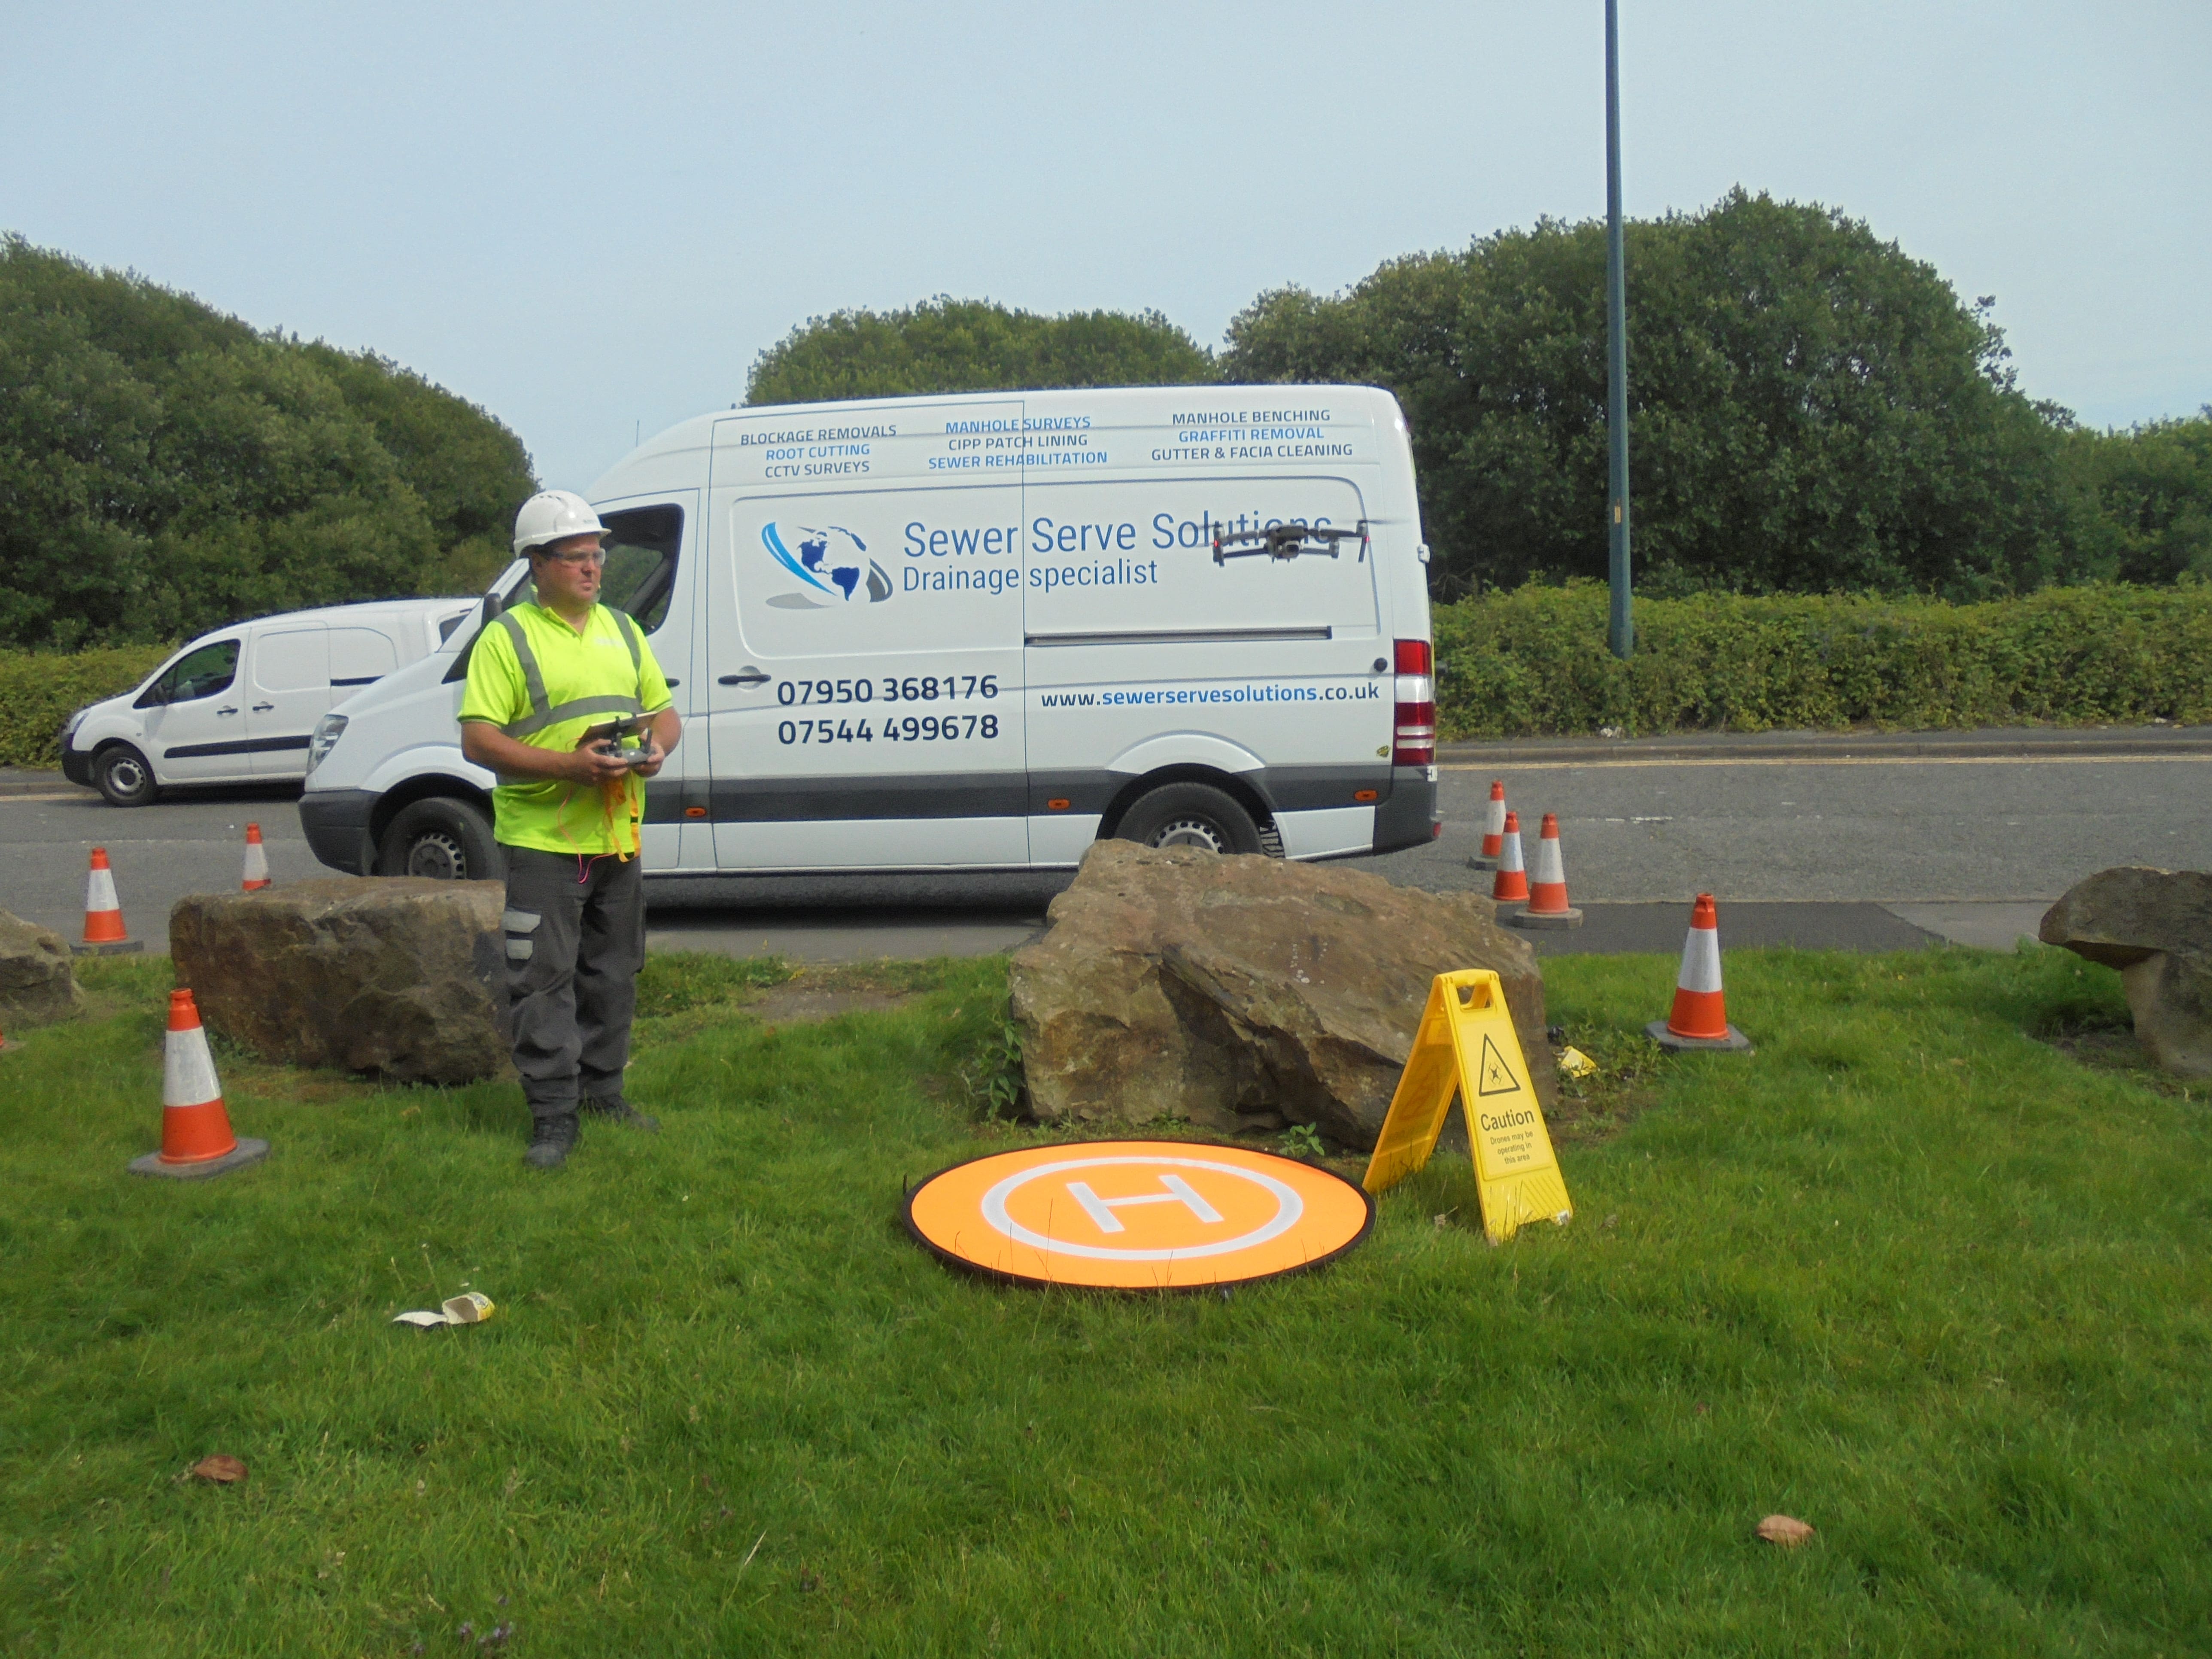 Sewer Drone mapping-Salford Manchester-Sewer Serve Solutions